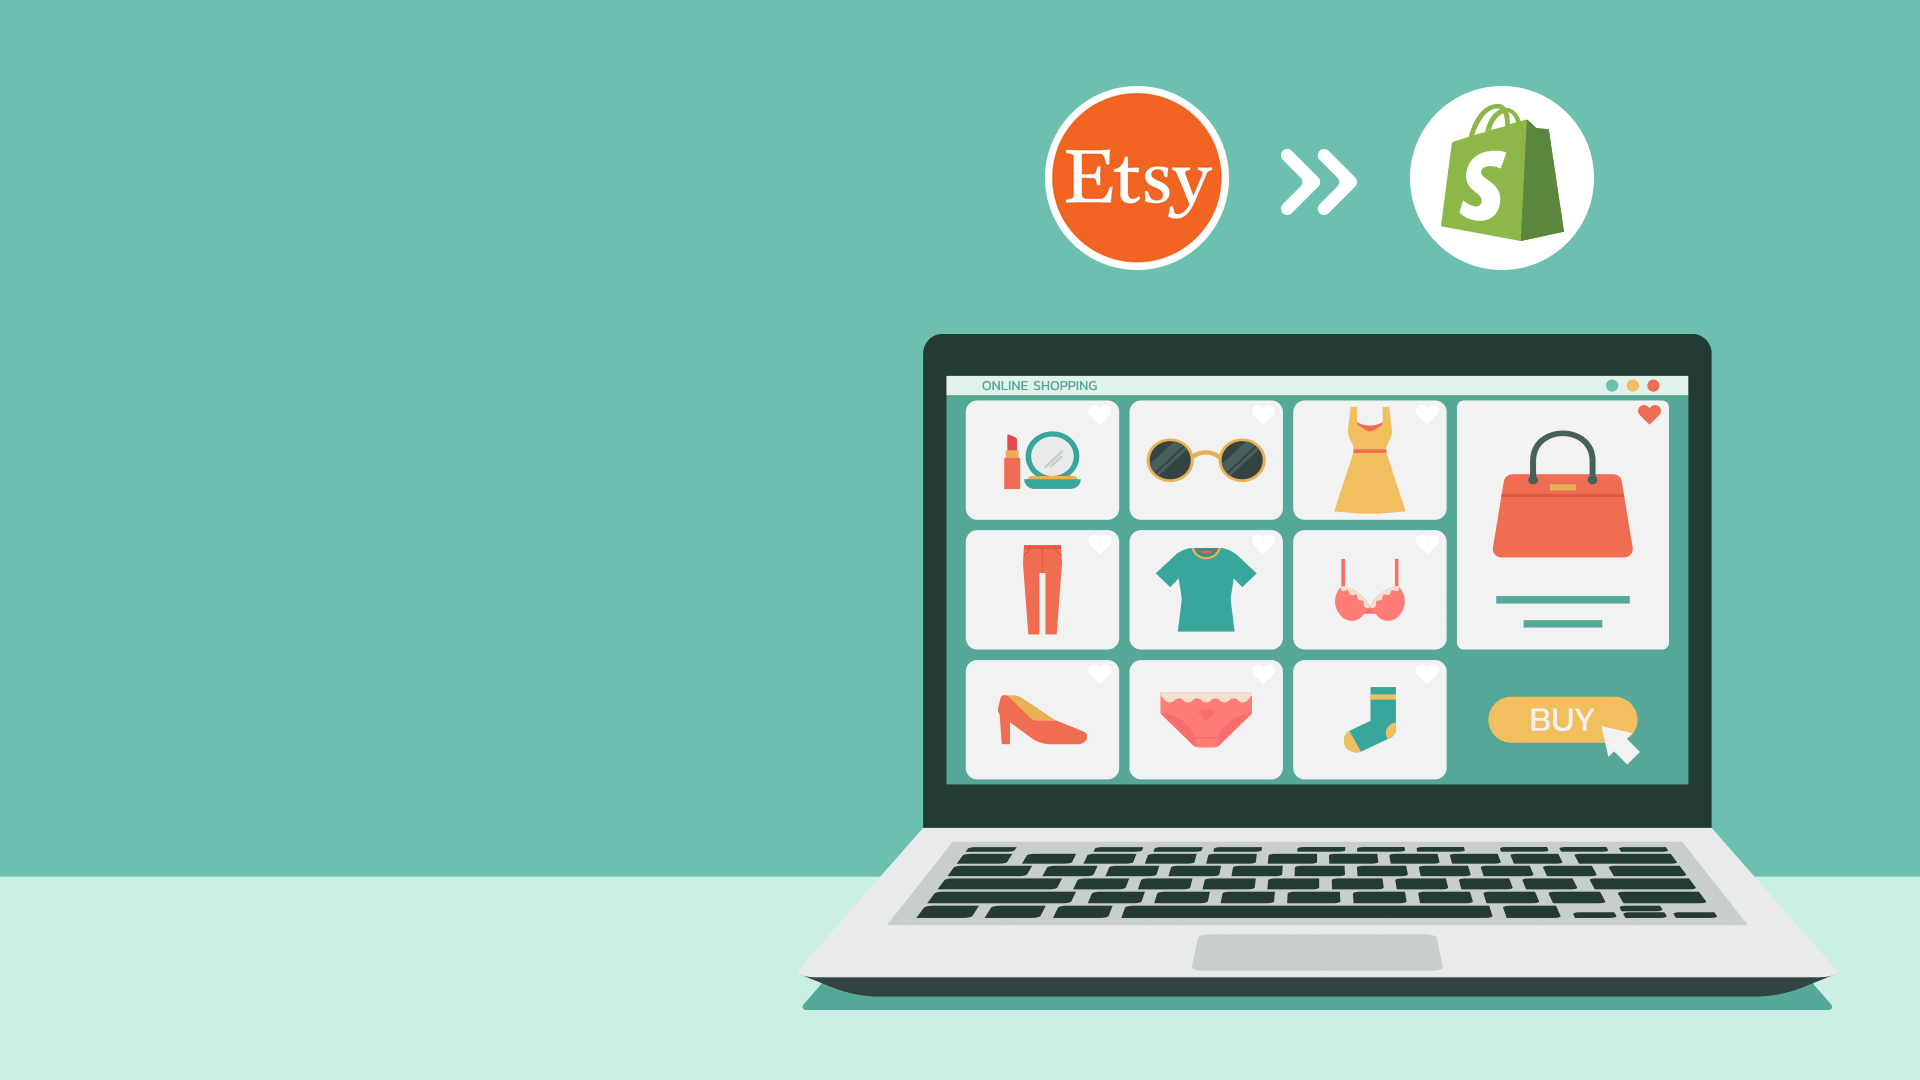 How to migrate your website from Etsy to Shopify